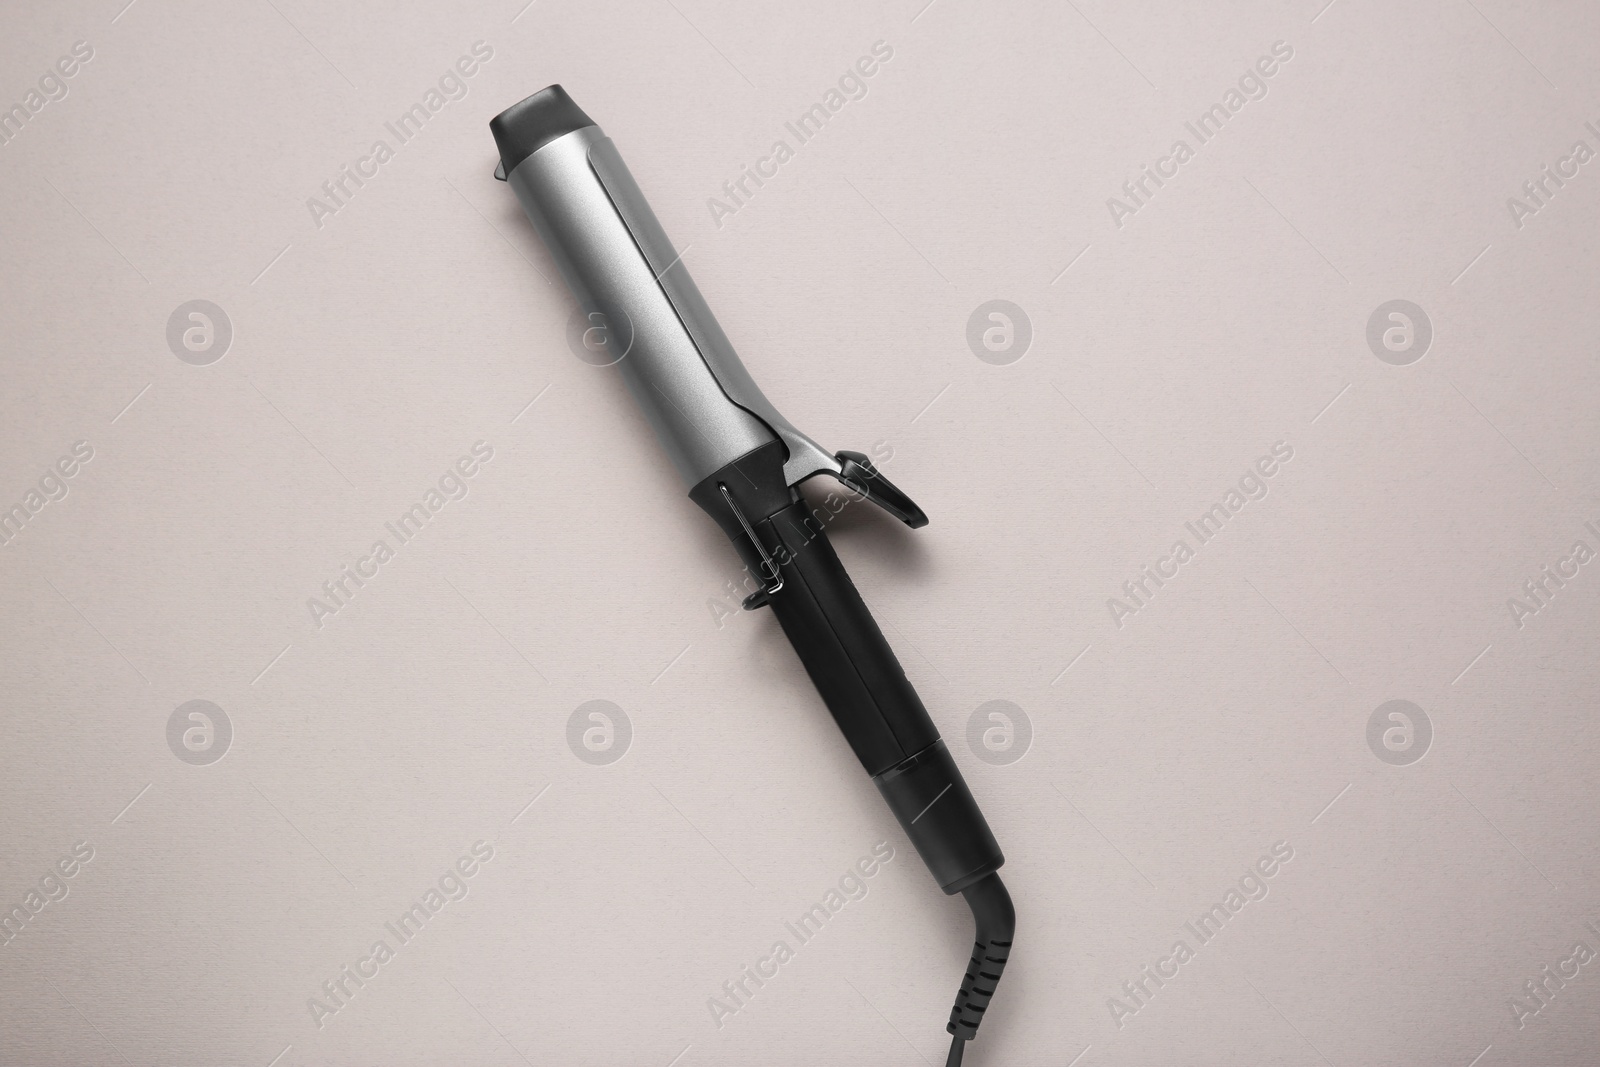 Photo of Hair curling iron on grey background, top view